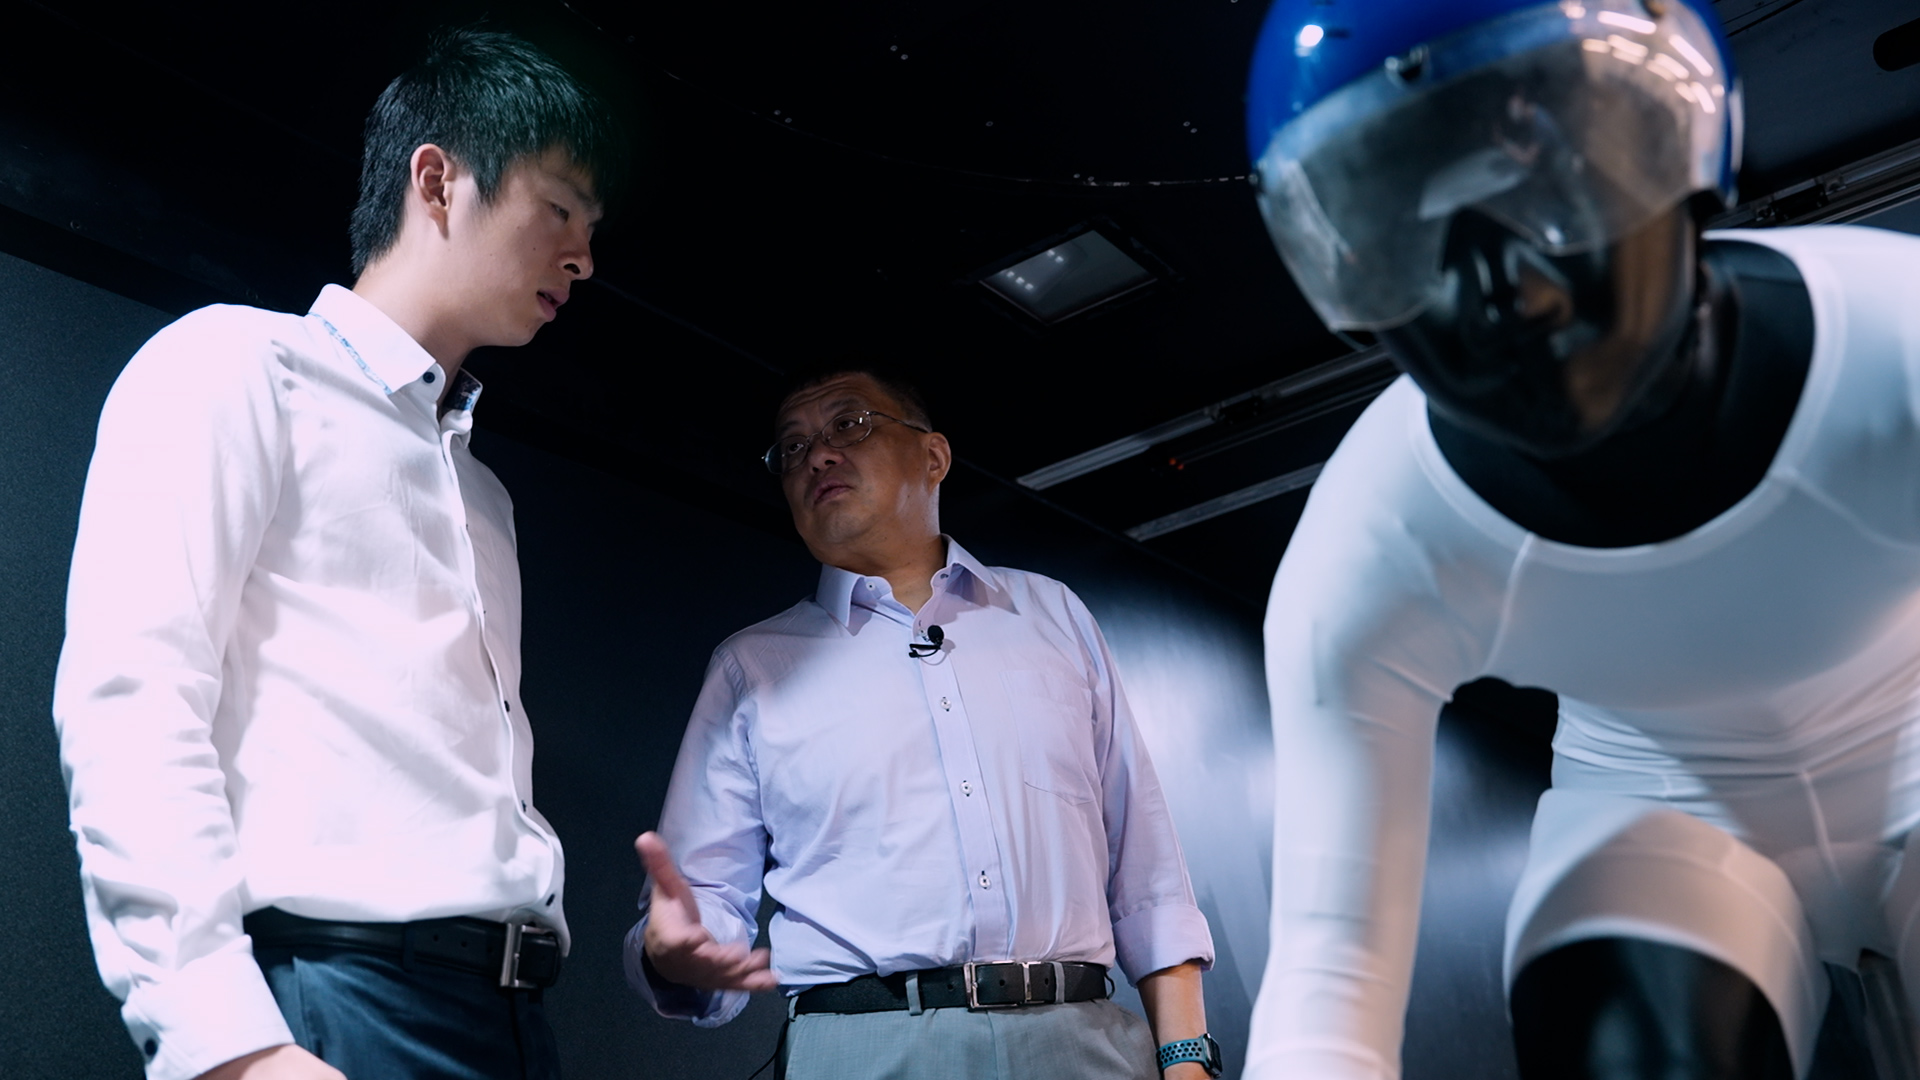 The research team headed by Prof. Zhang has been conducting various experiments for the Hong Kong Cycling Team in this wind tunnel laboratory since 2018.